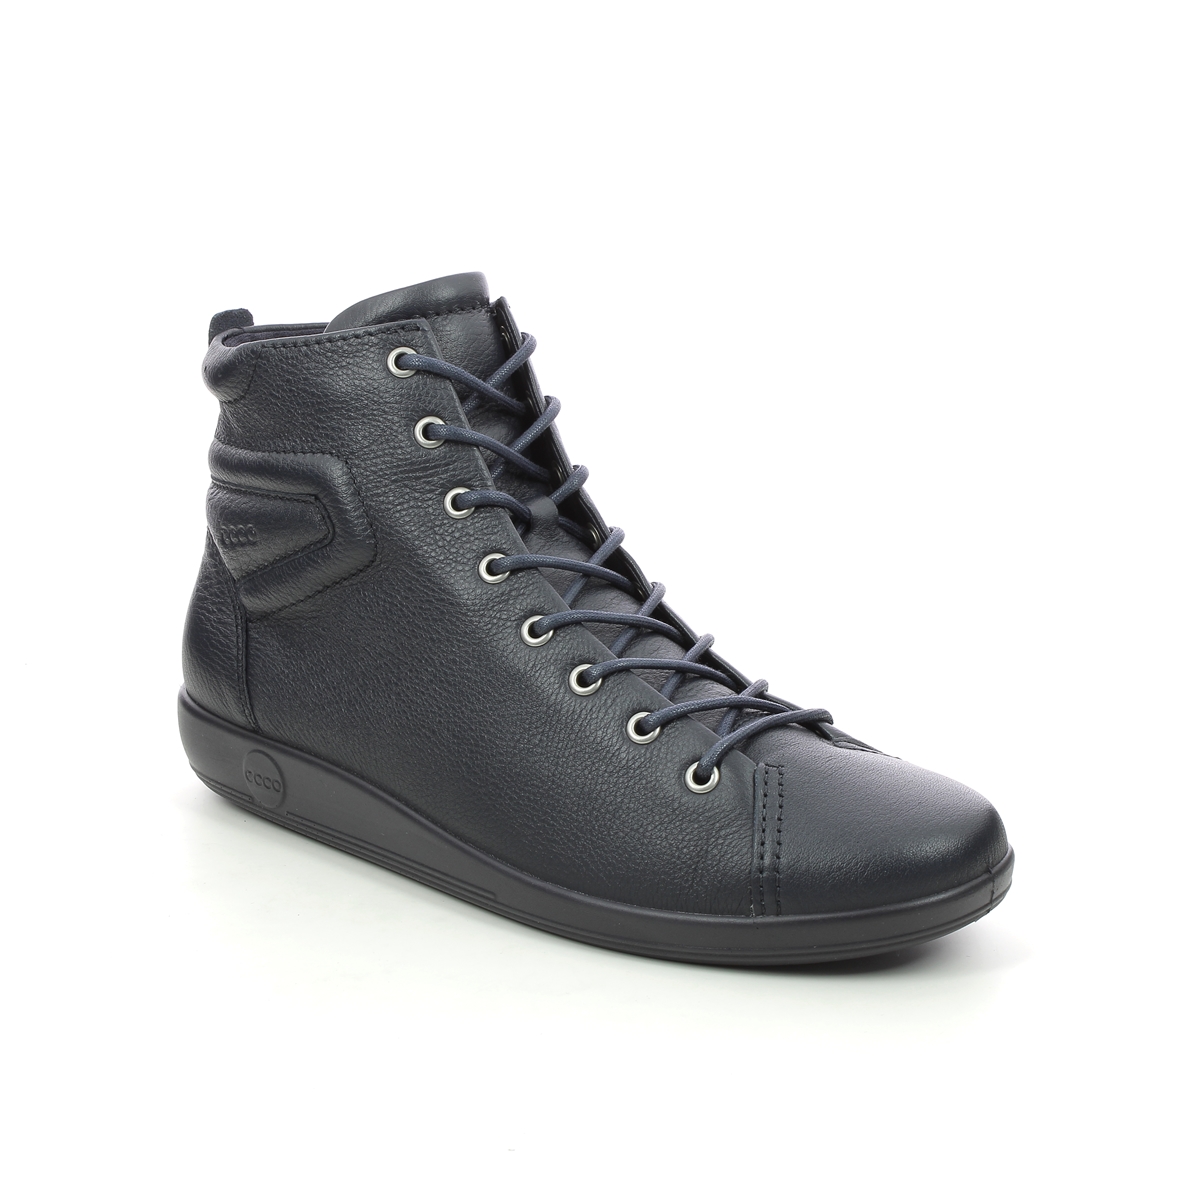 ECCO Soft 2.0 Boot Navy leather Womens Lace Up Boots 206523-11038 in a Plain Leather in Size 38